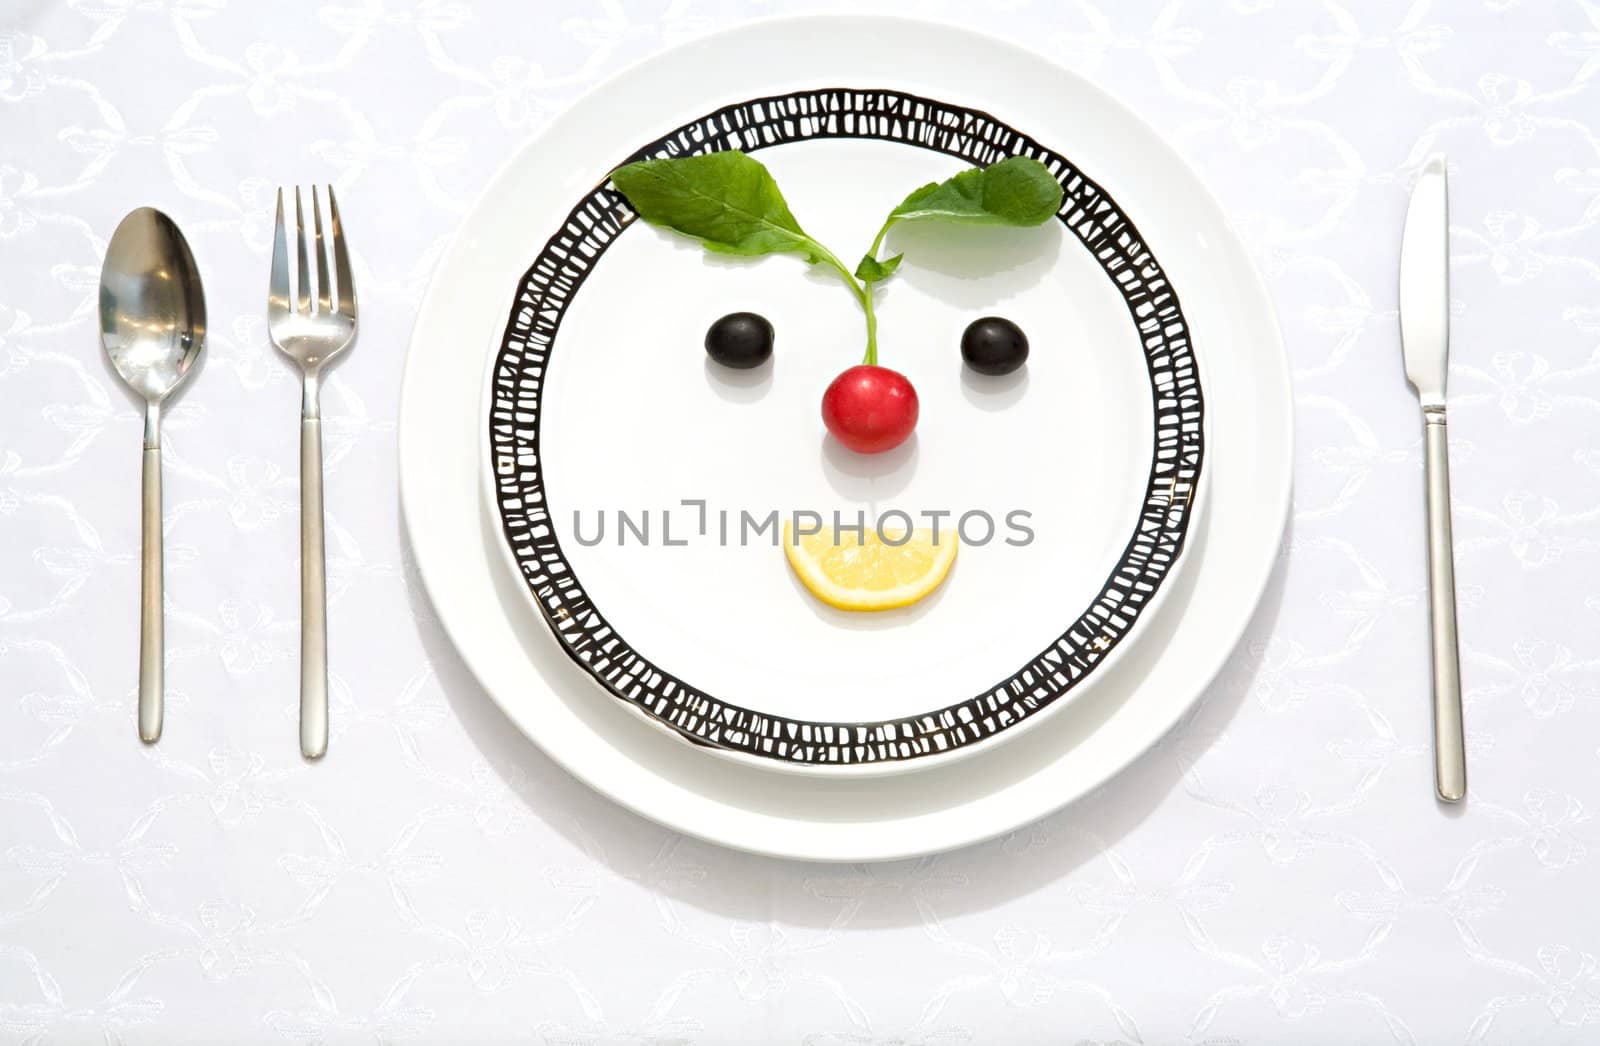 The meal made as a smiling face from olives, radish and lemon slice on a flat plate with a knife, a fork and a spoon
